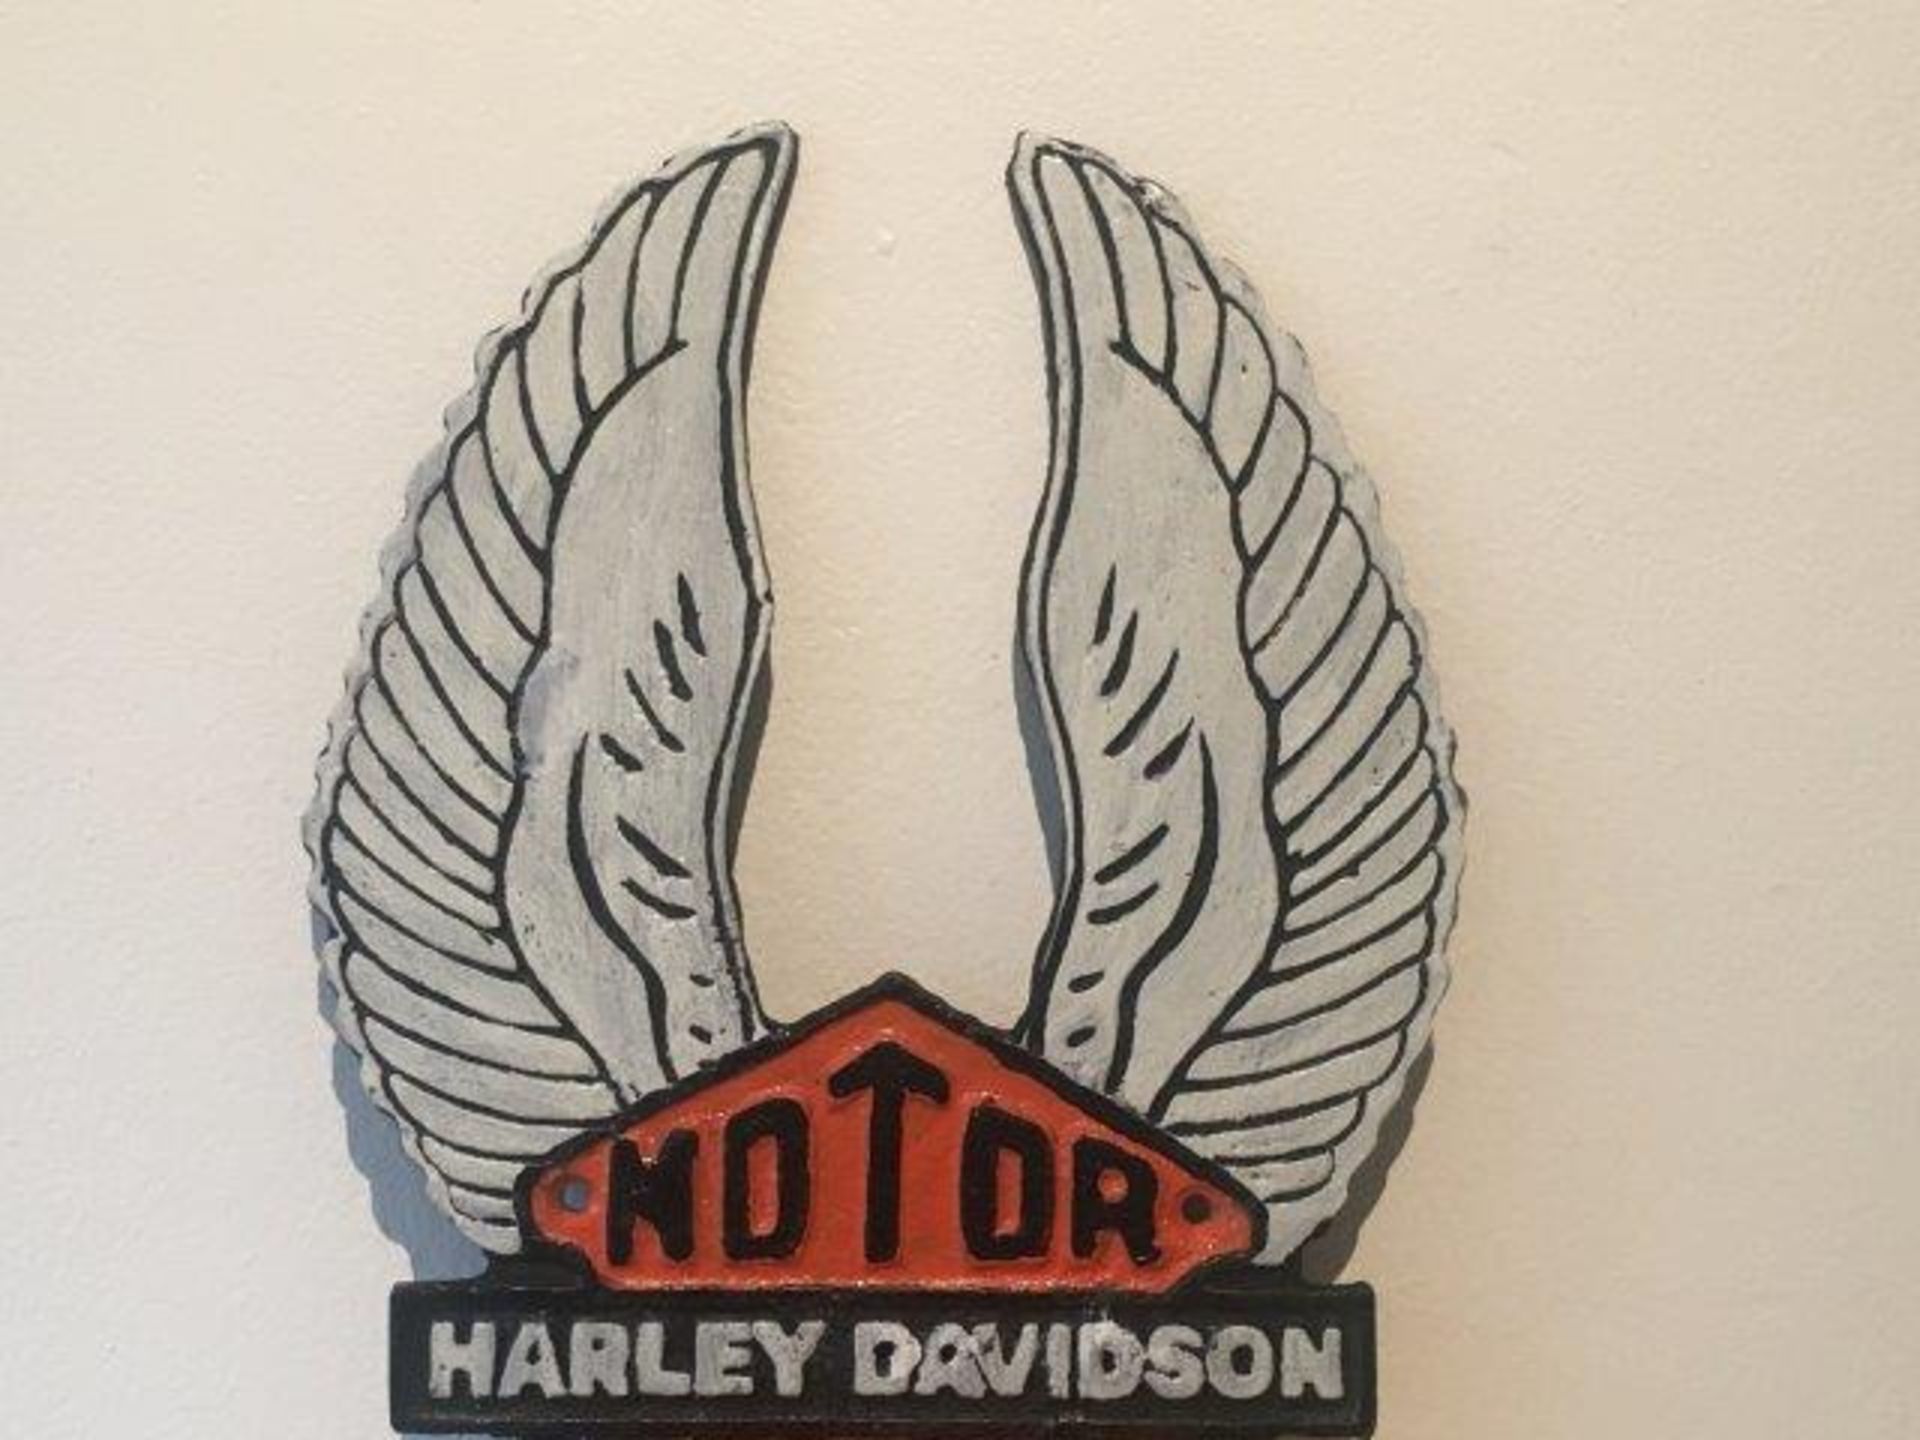 Harley Davidson Motorcycles Cast Iron Tall Wing Sign - Image 2 of 4